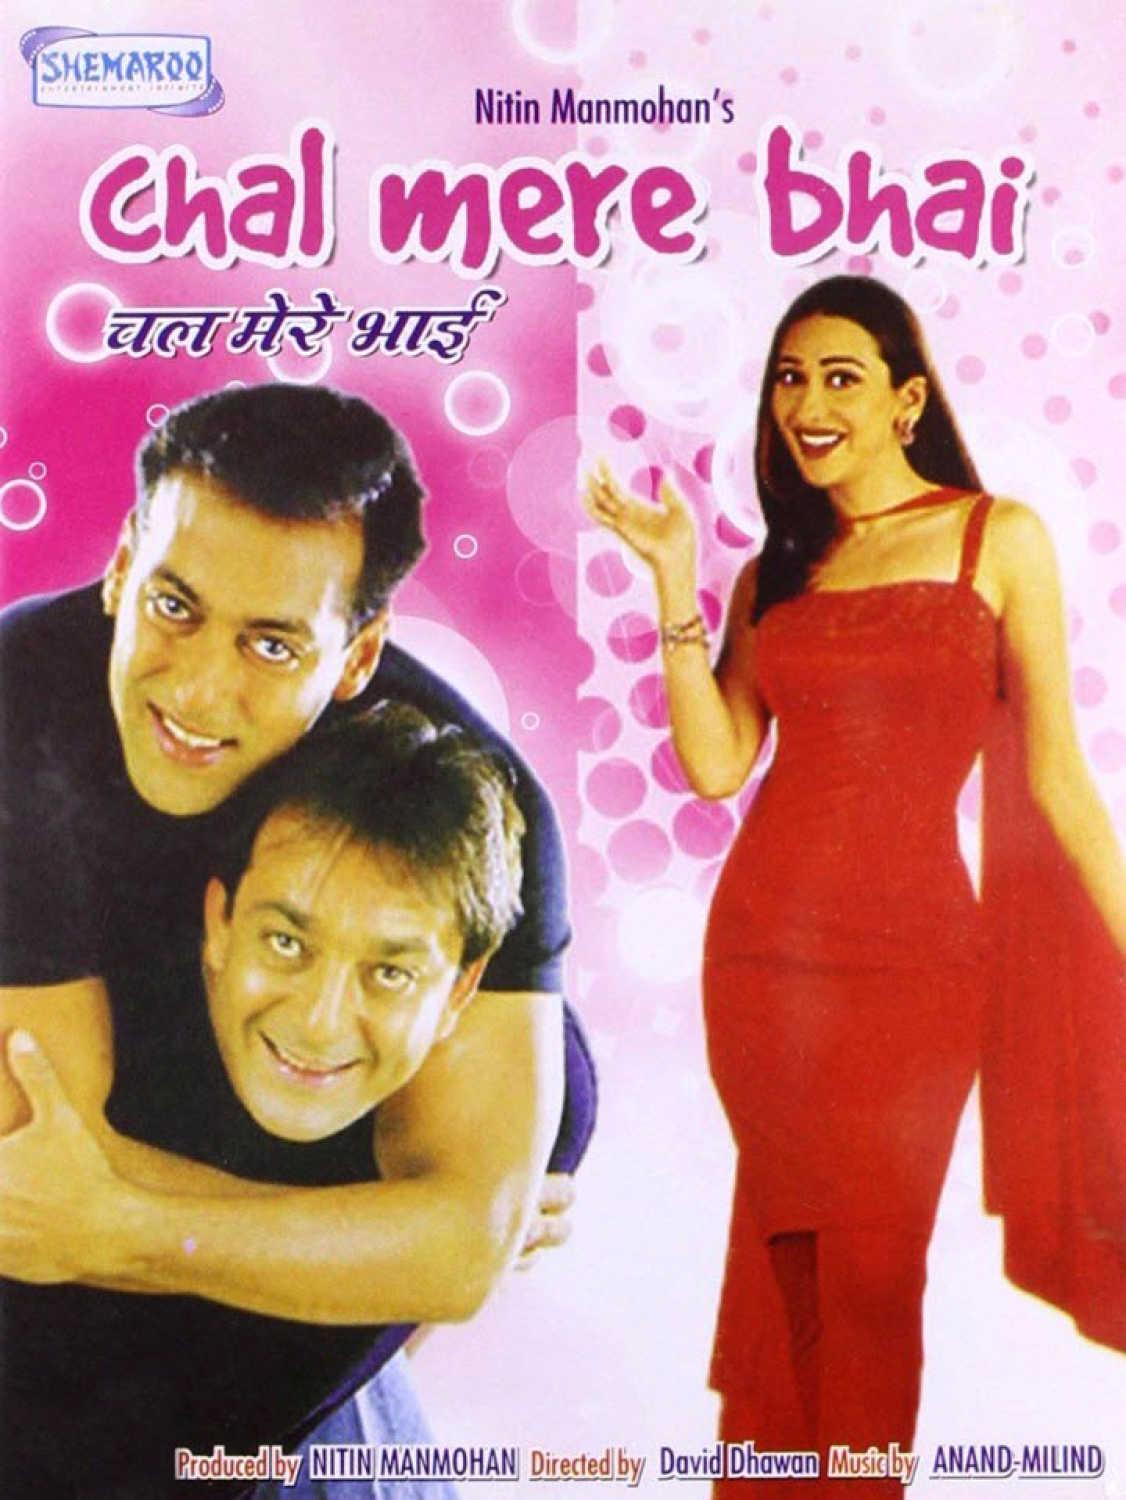 Salman's 'Prem' added a comic touch to this movie alongside Sanjay Dutt. His chemistry with the cast and his charm elevated the storyline.